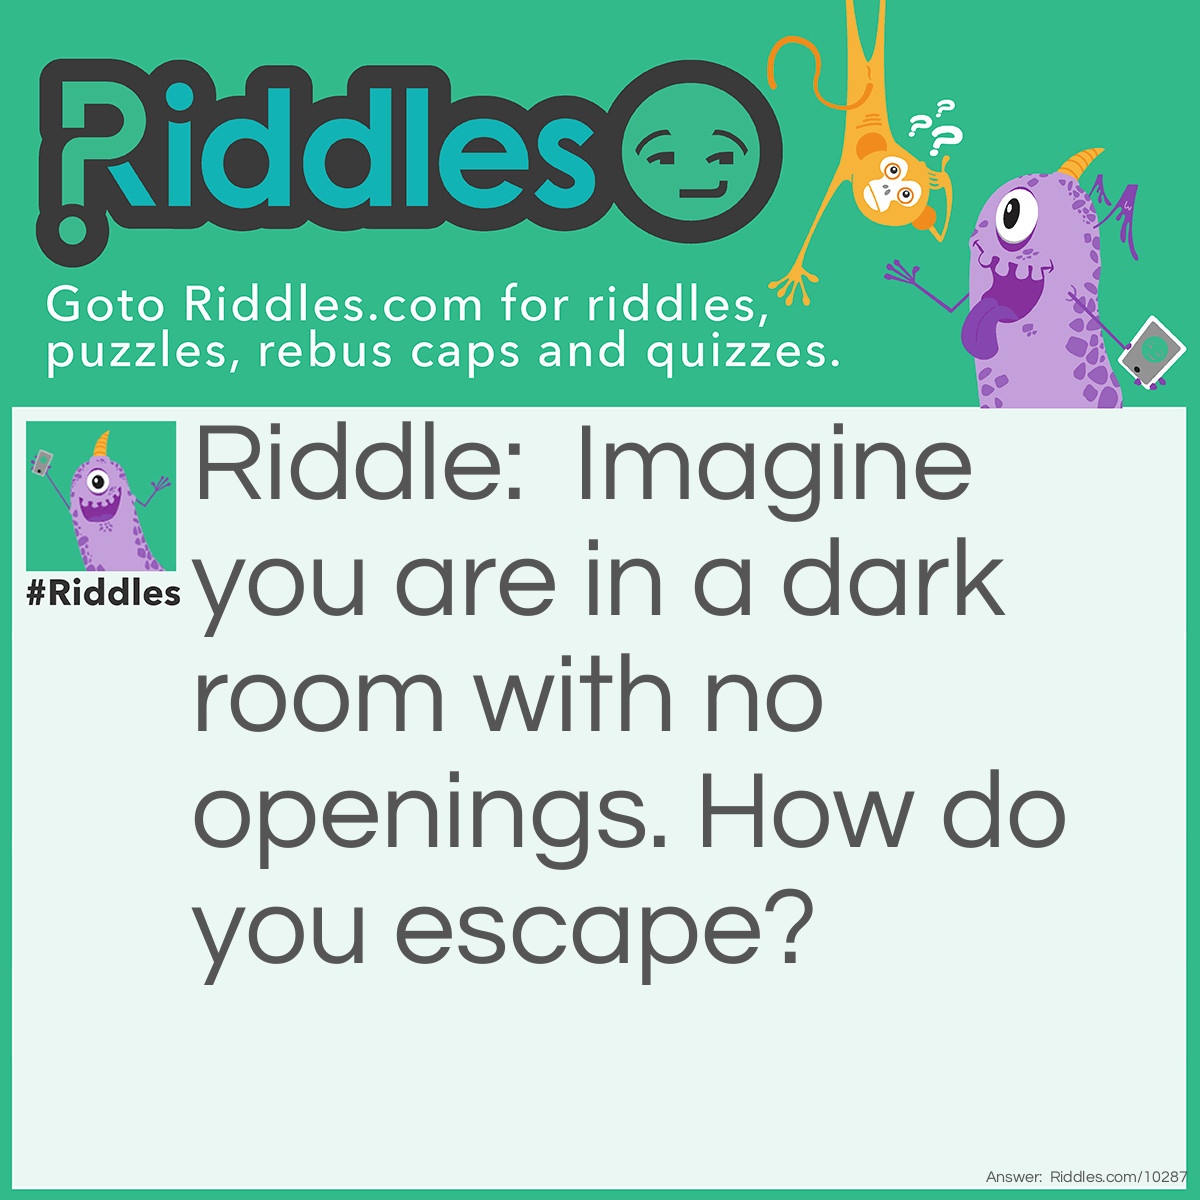 Riddle: Imagine you are in a dark room with no openings. How do you escape? Answer: Stop imagining.